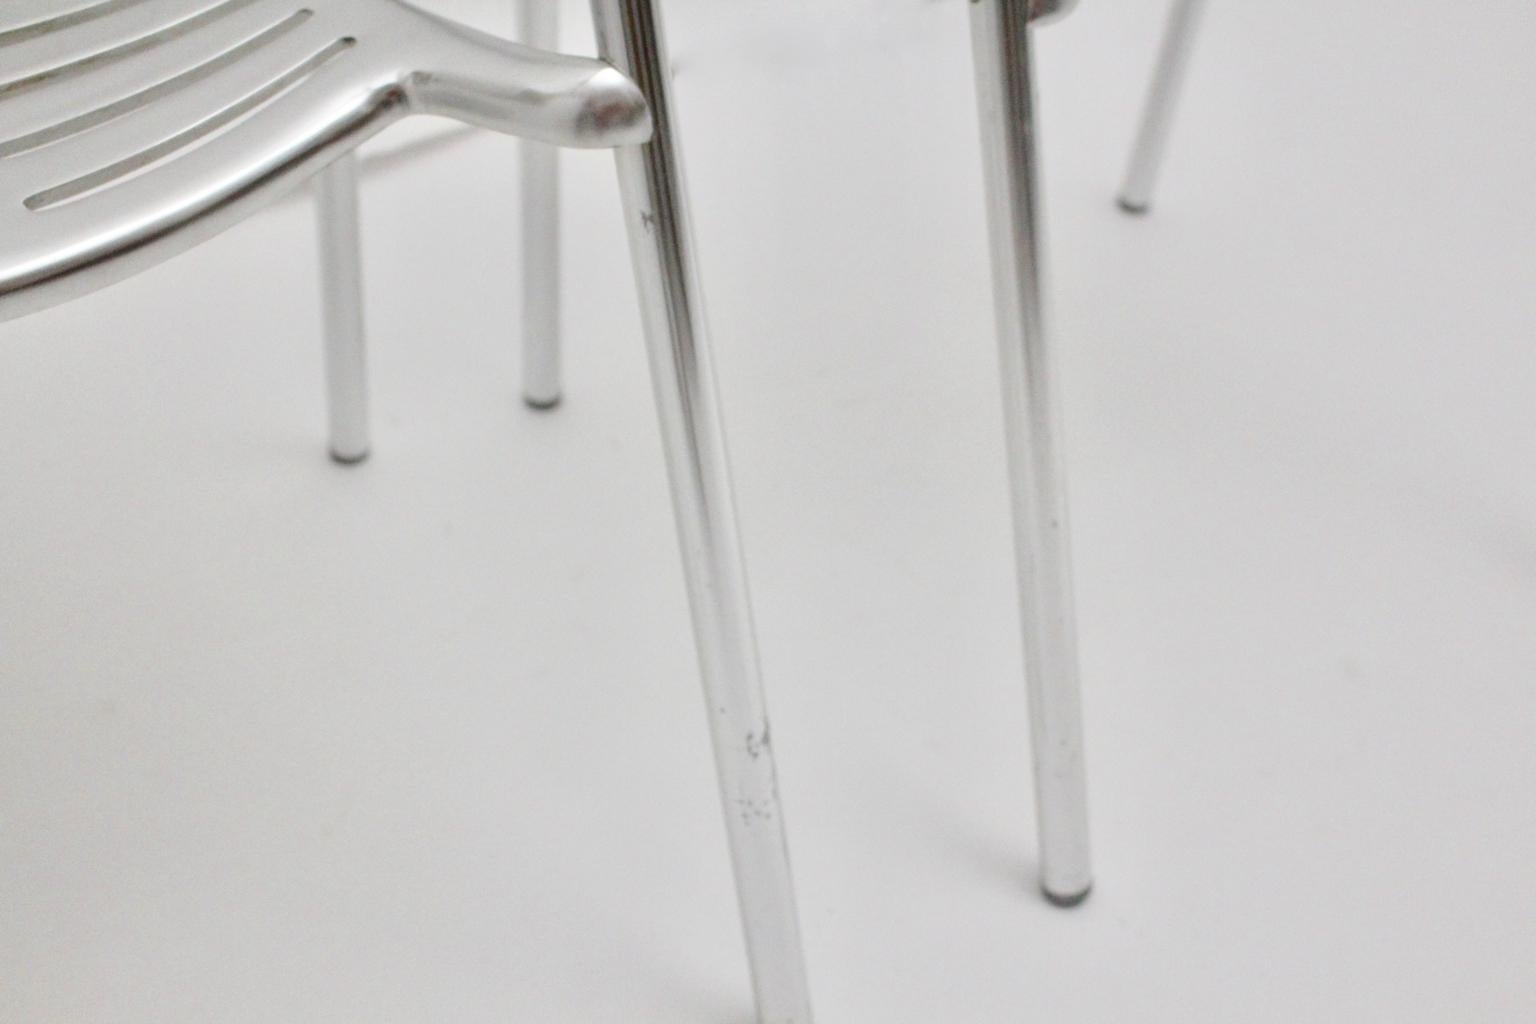 Late 20th Century Modern Vintage Pair of Aluminum Chairs by Jorge Pensi, Spain 1986-1988 for Amat For Sale